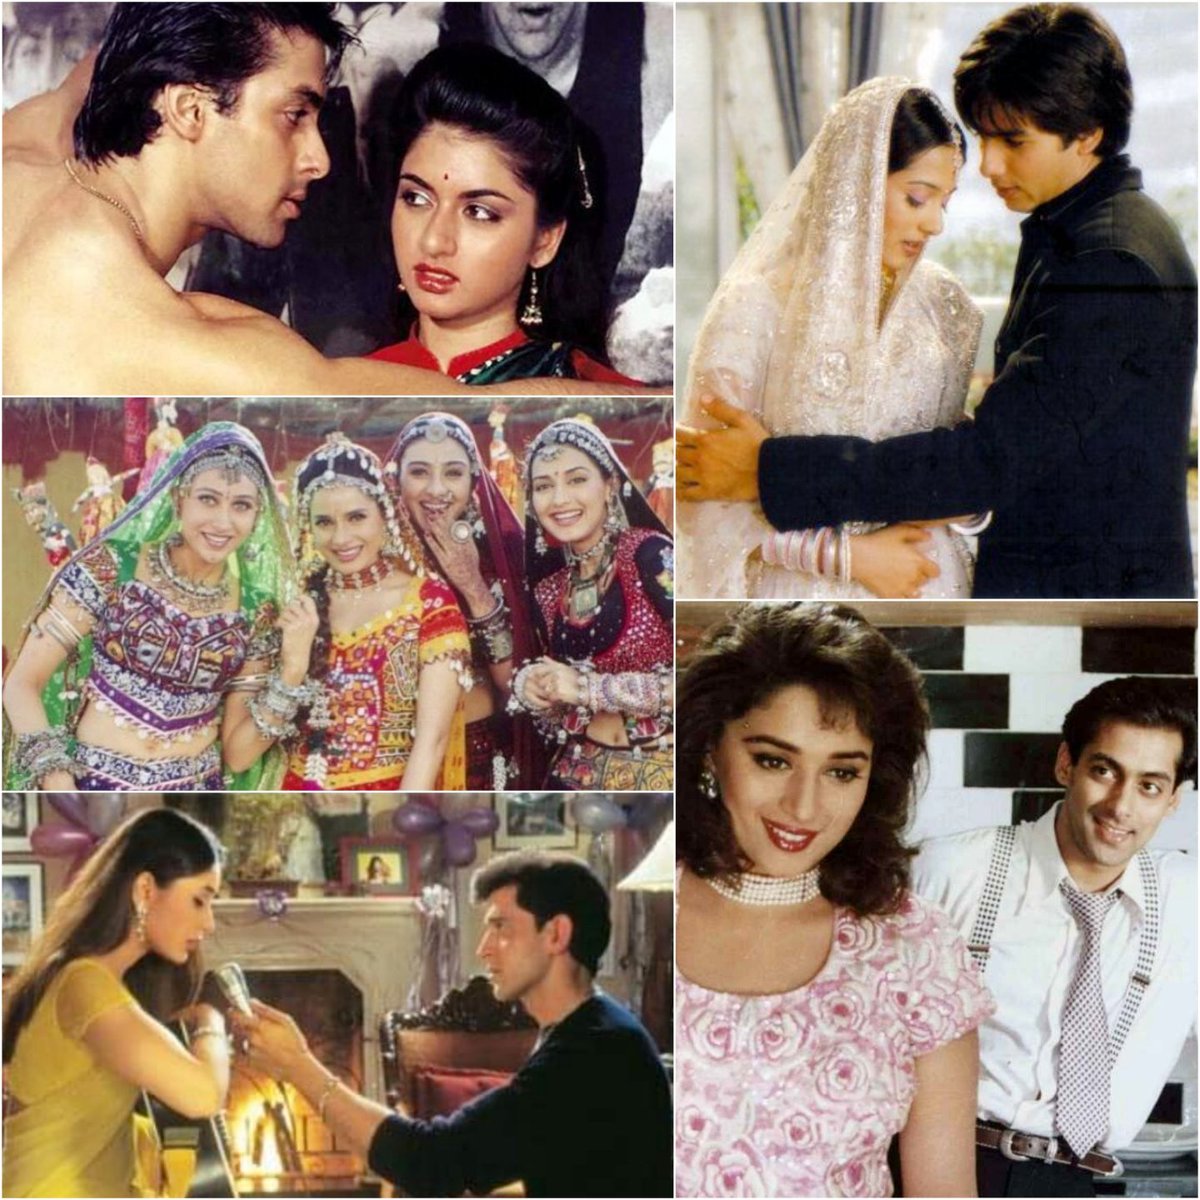 A day of Rajshri playlist... 🎵🎶 Which film's songs do you like?